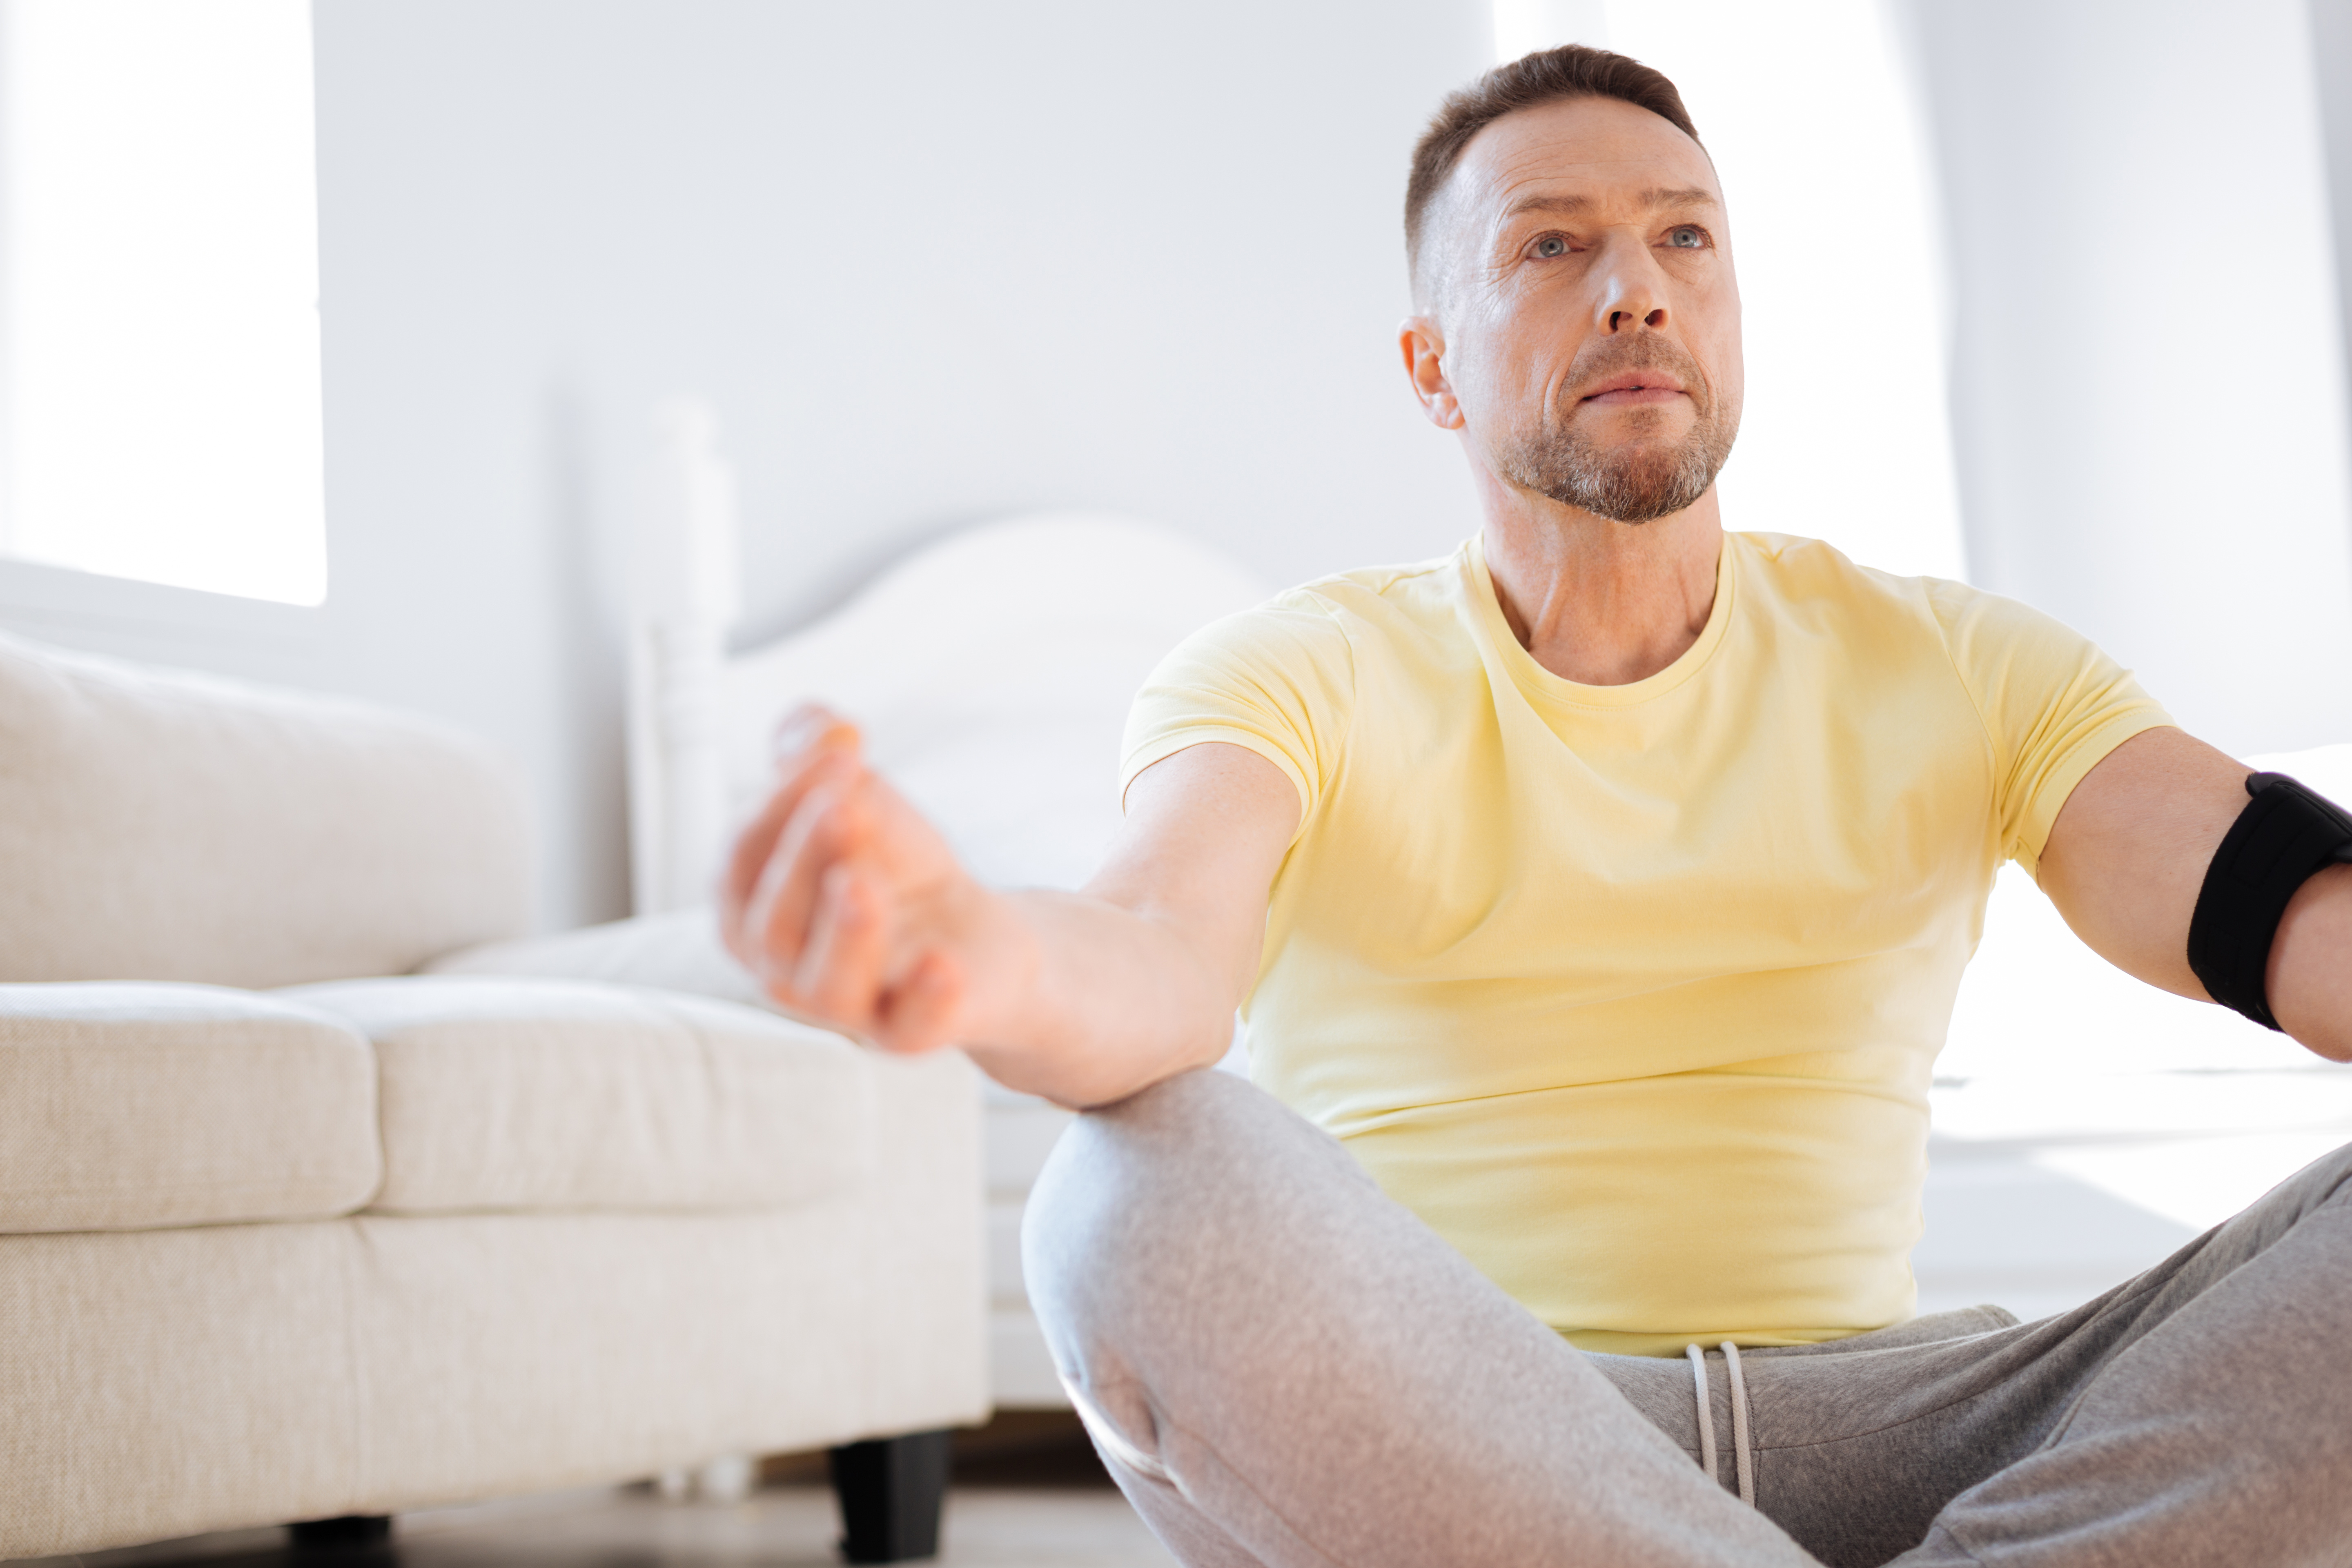 Photo of a man sitting cross-legged on the floor in front of a white sofa. He wears a yellow t-shirt and gray sweatpants.  His outstretched arms rest on his knees as he gazes forward.